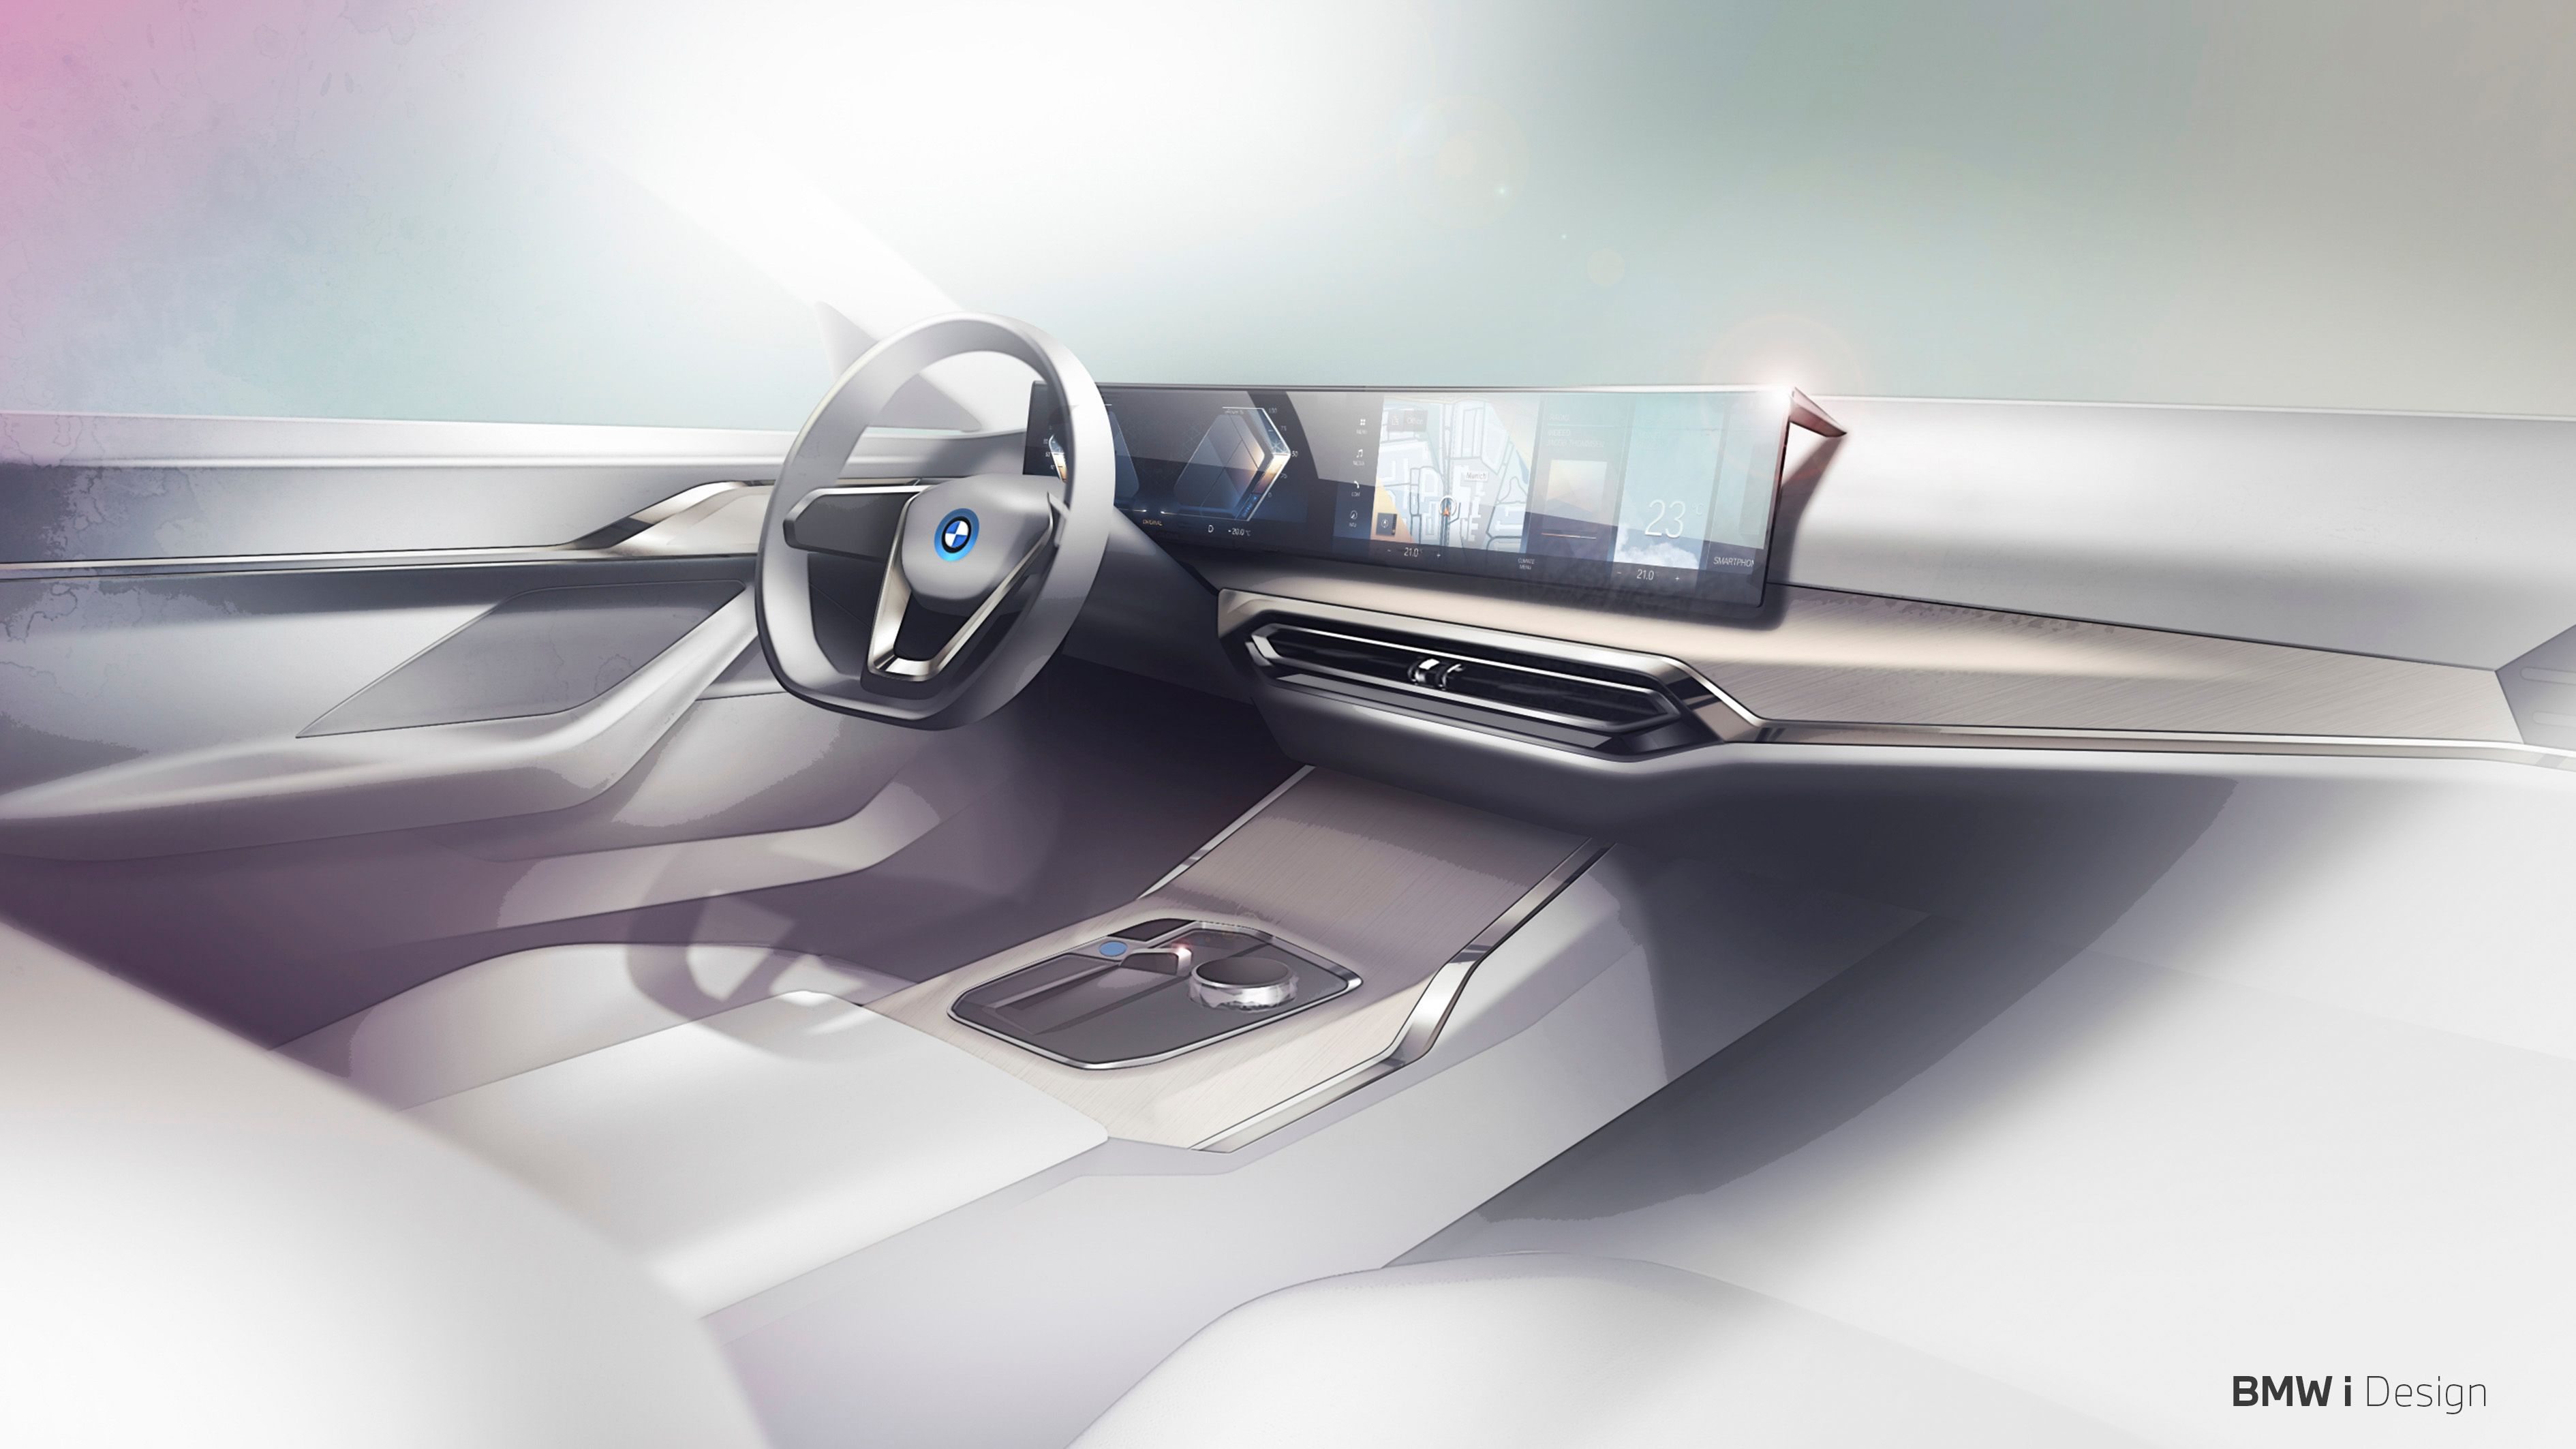 2022 BMW i4 - This Is The German Automaker's Answer To The Tesla Model 3